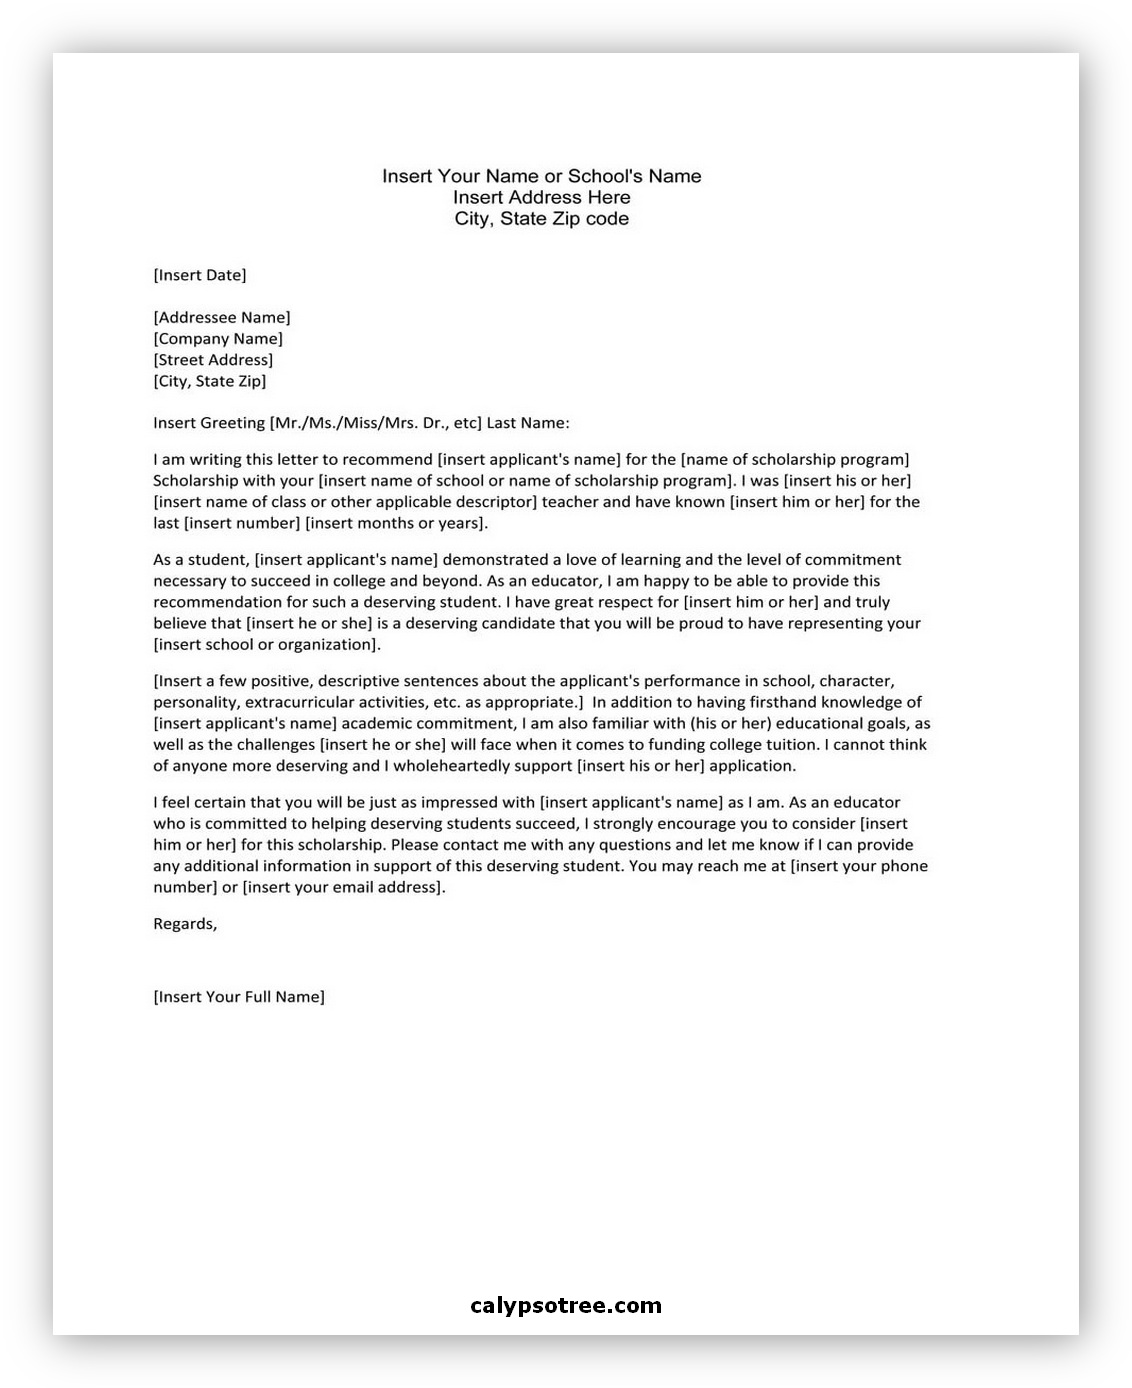 Letter of Recommendation for Scholarship 02